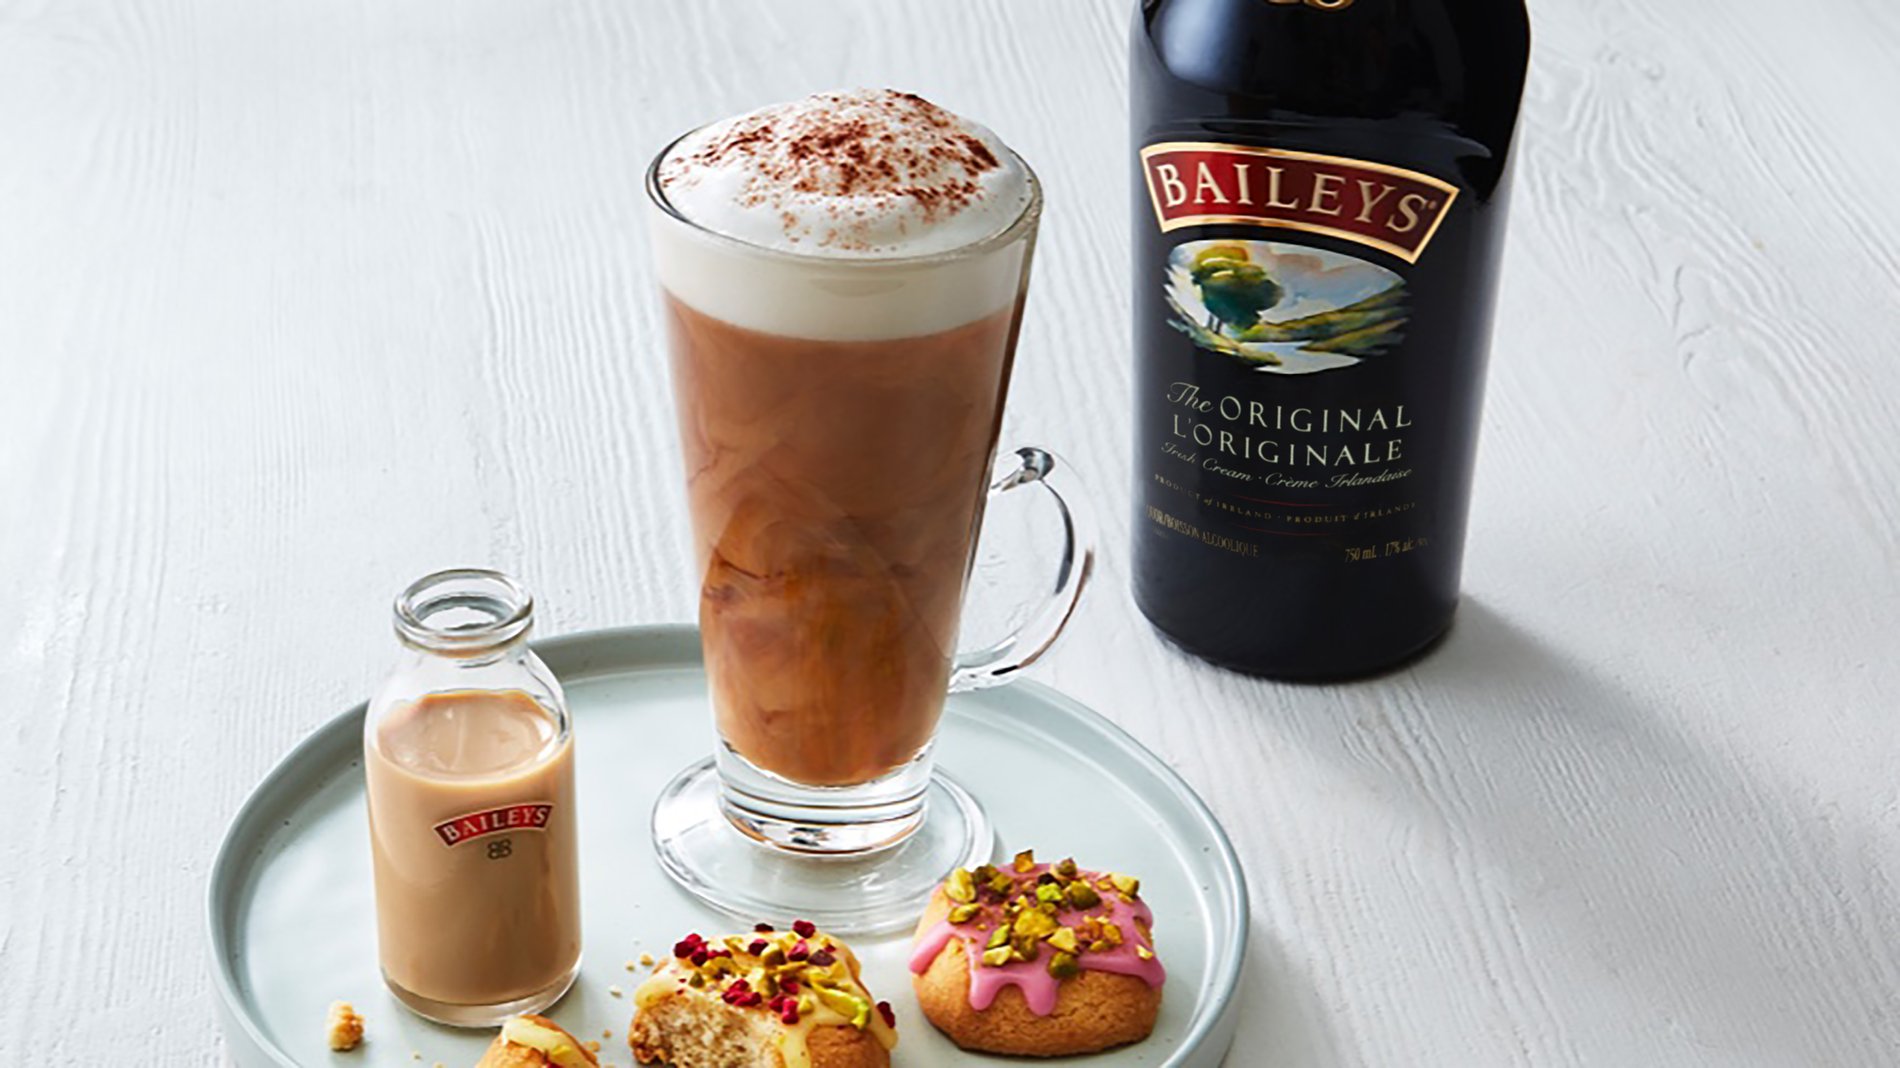 Baileys-infused latte with bottle of Baileys and small cookies